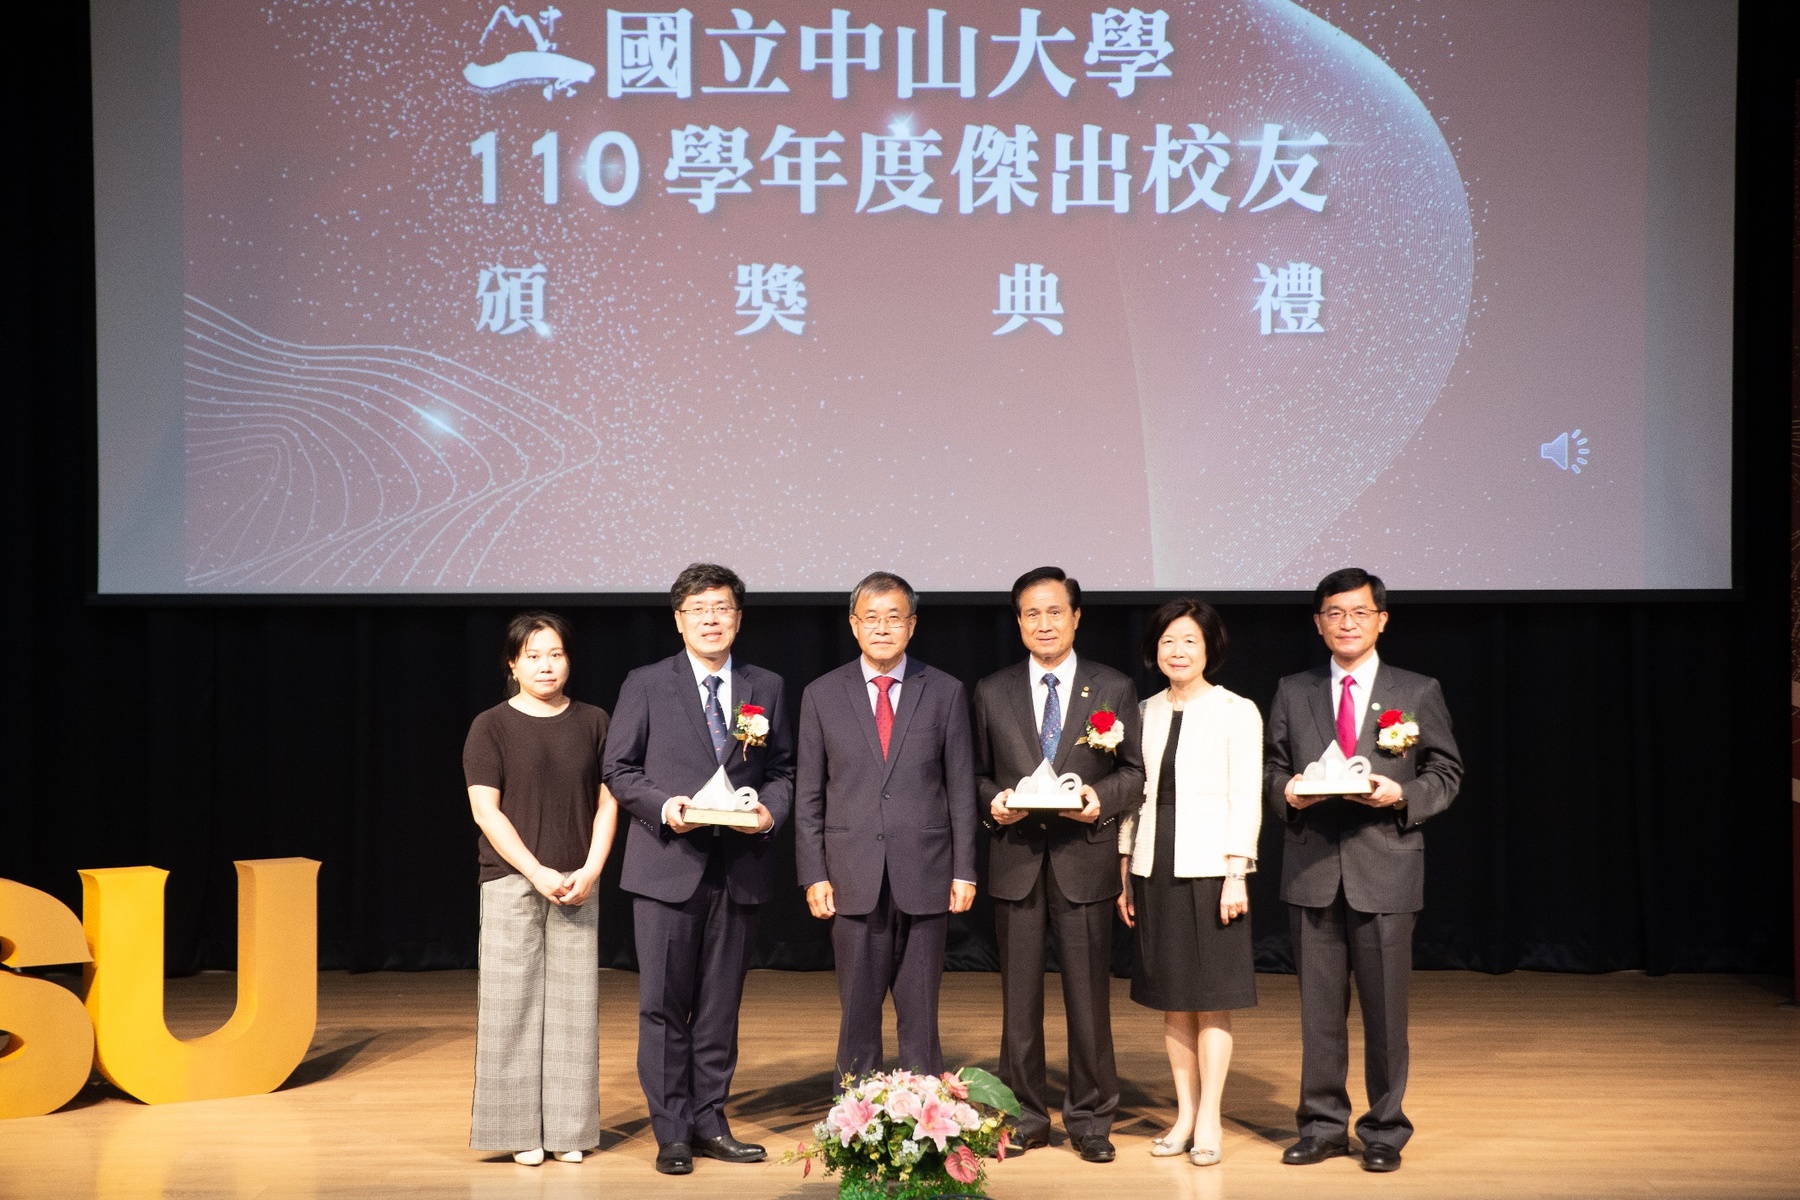 NSYSU President Ying-Yao Cheng and Outstanding Alumni with their spouses